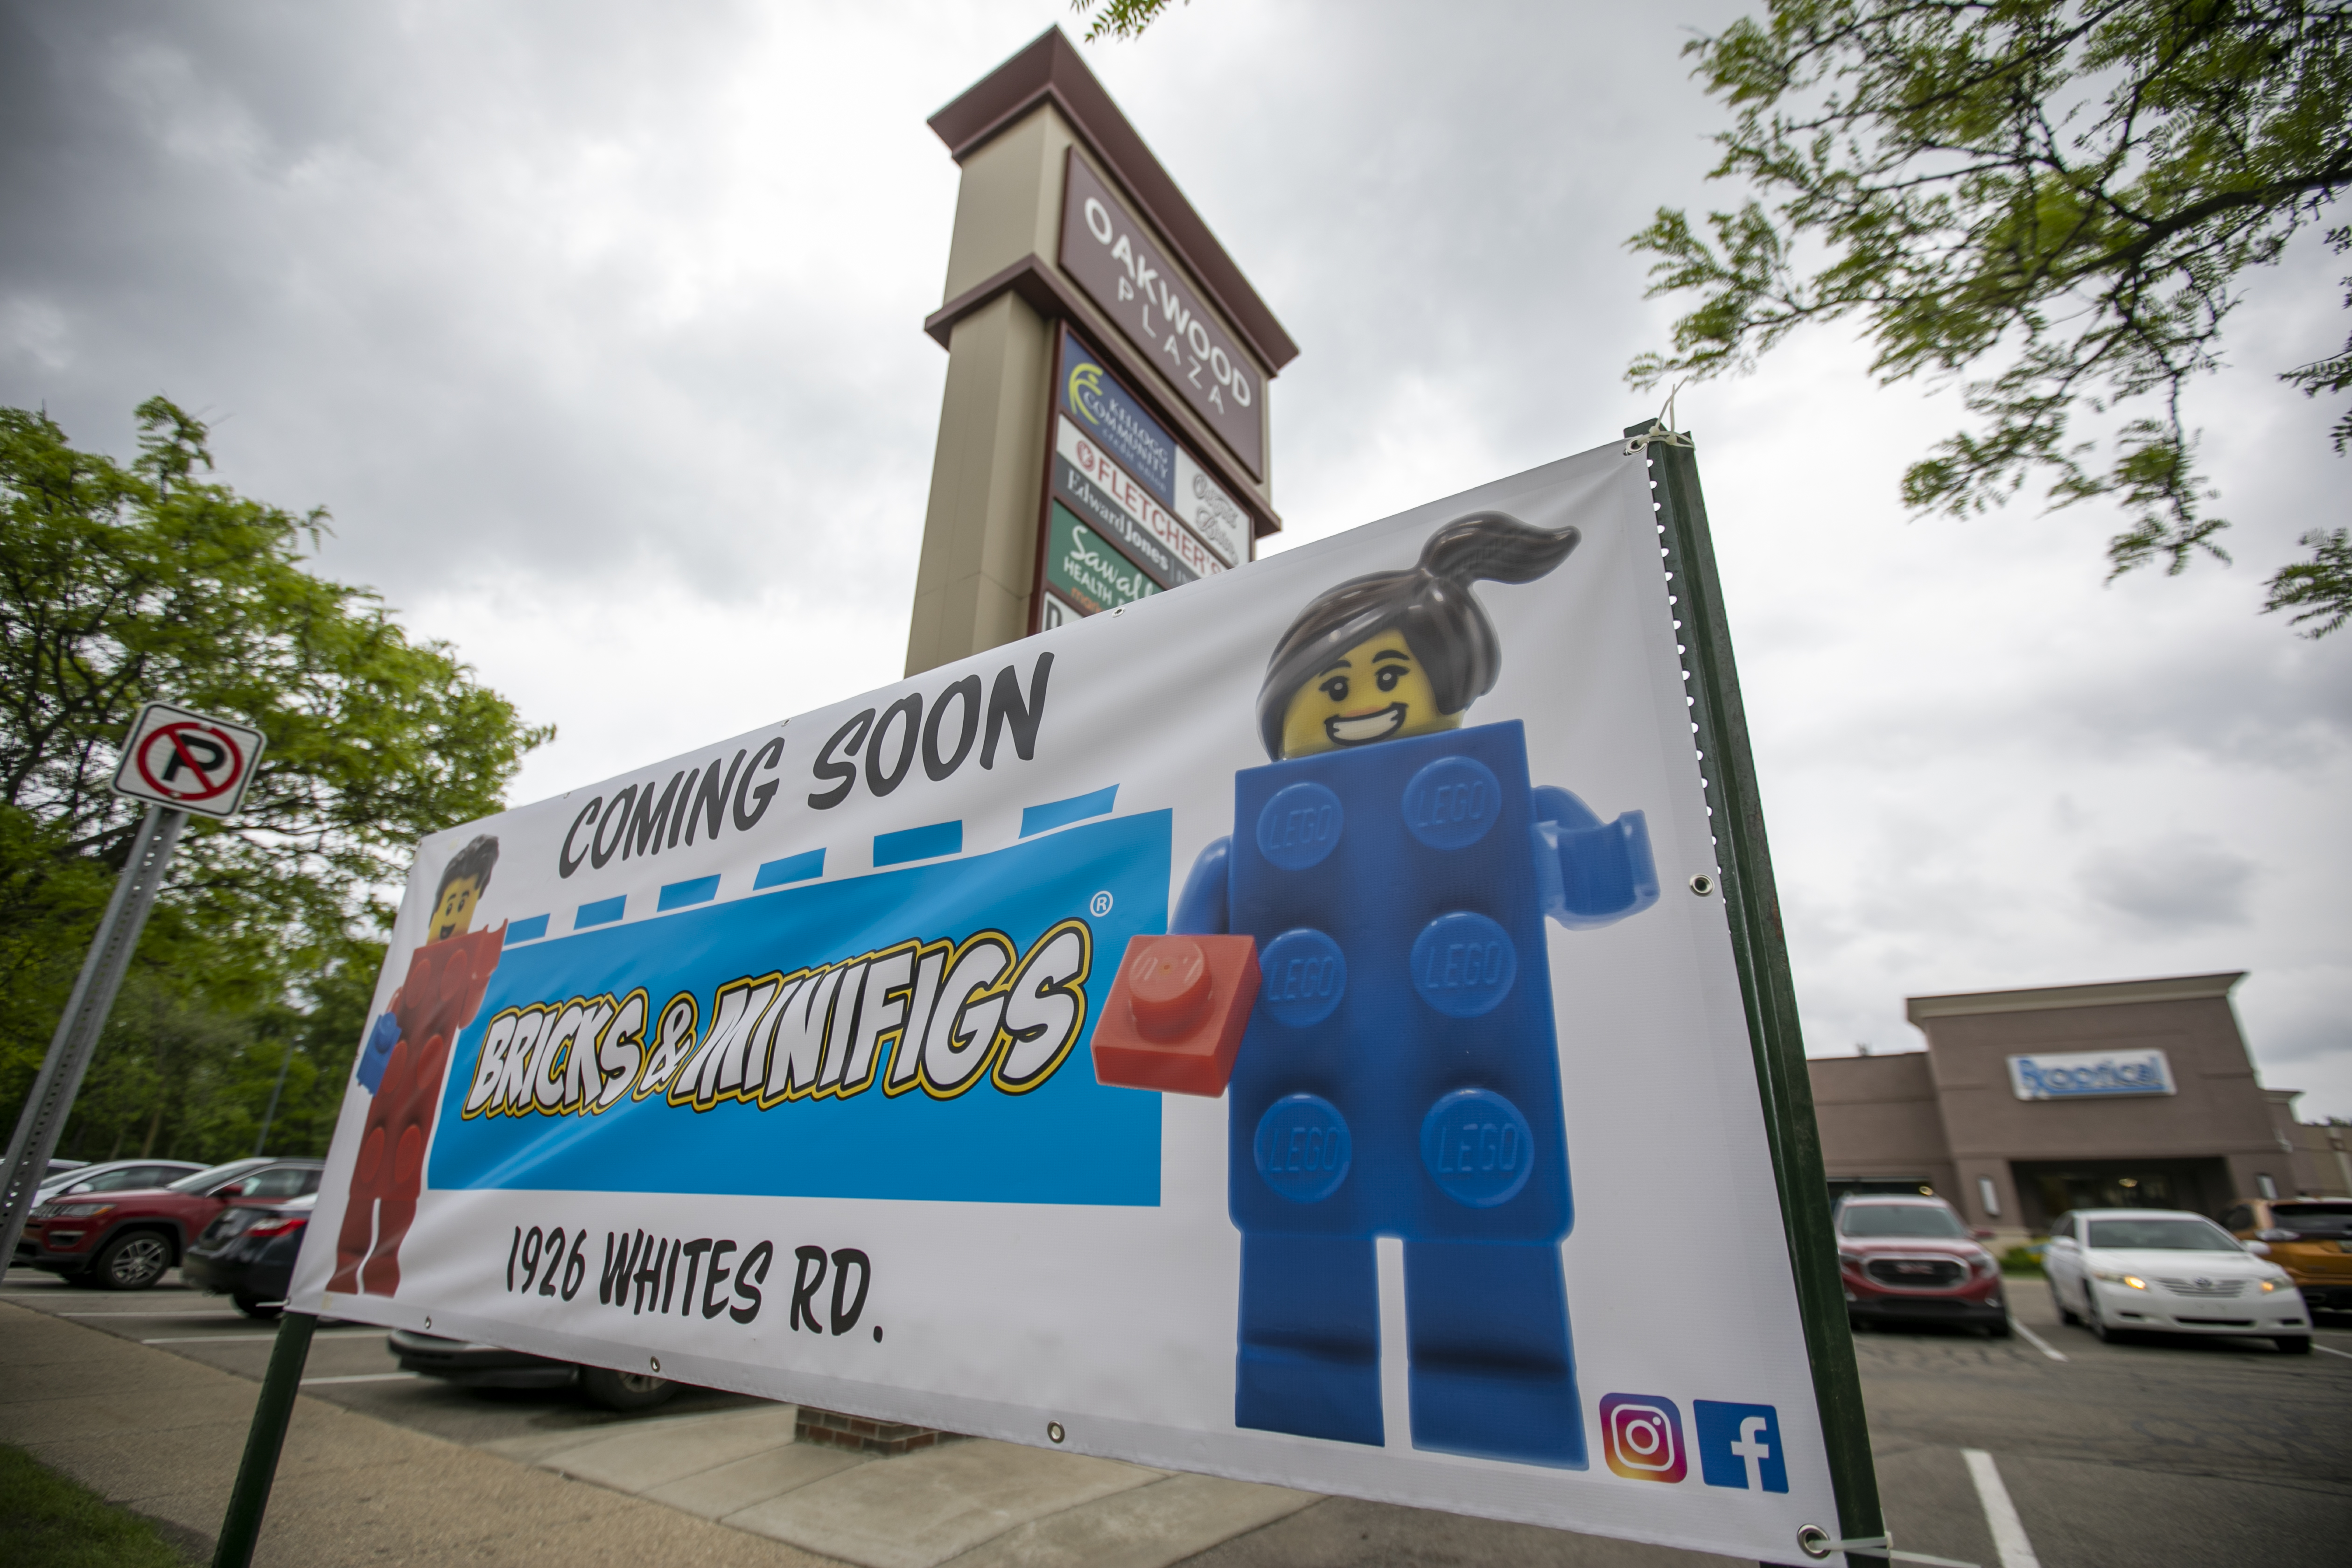 New Lego store coming to Grand Rapids aims to be 'a place for creativity' 